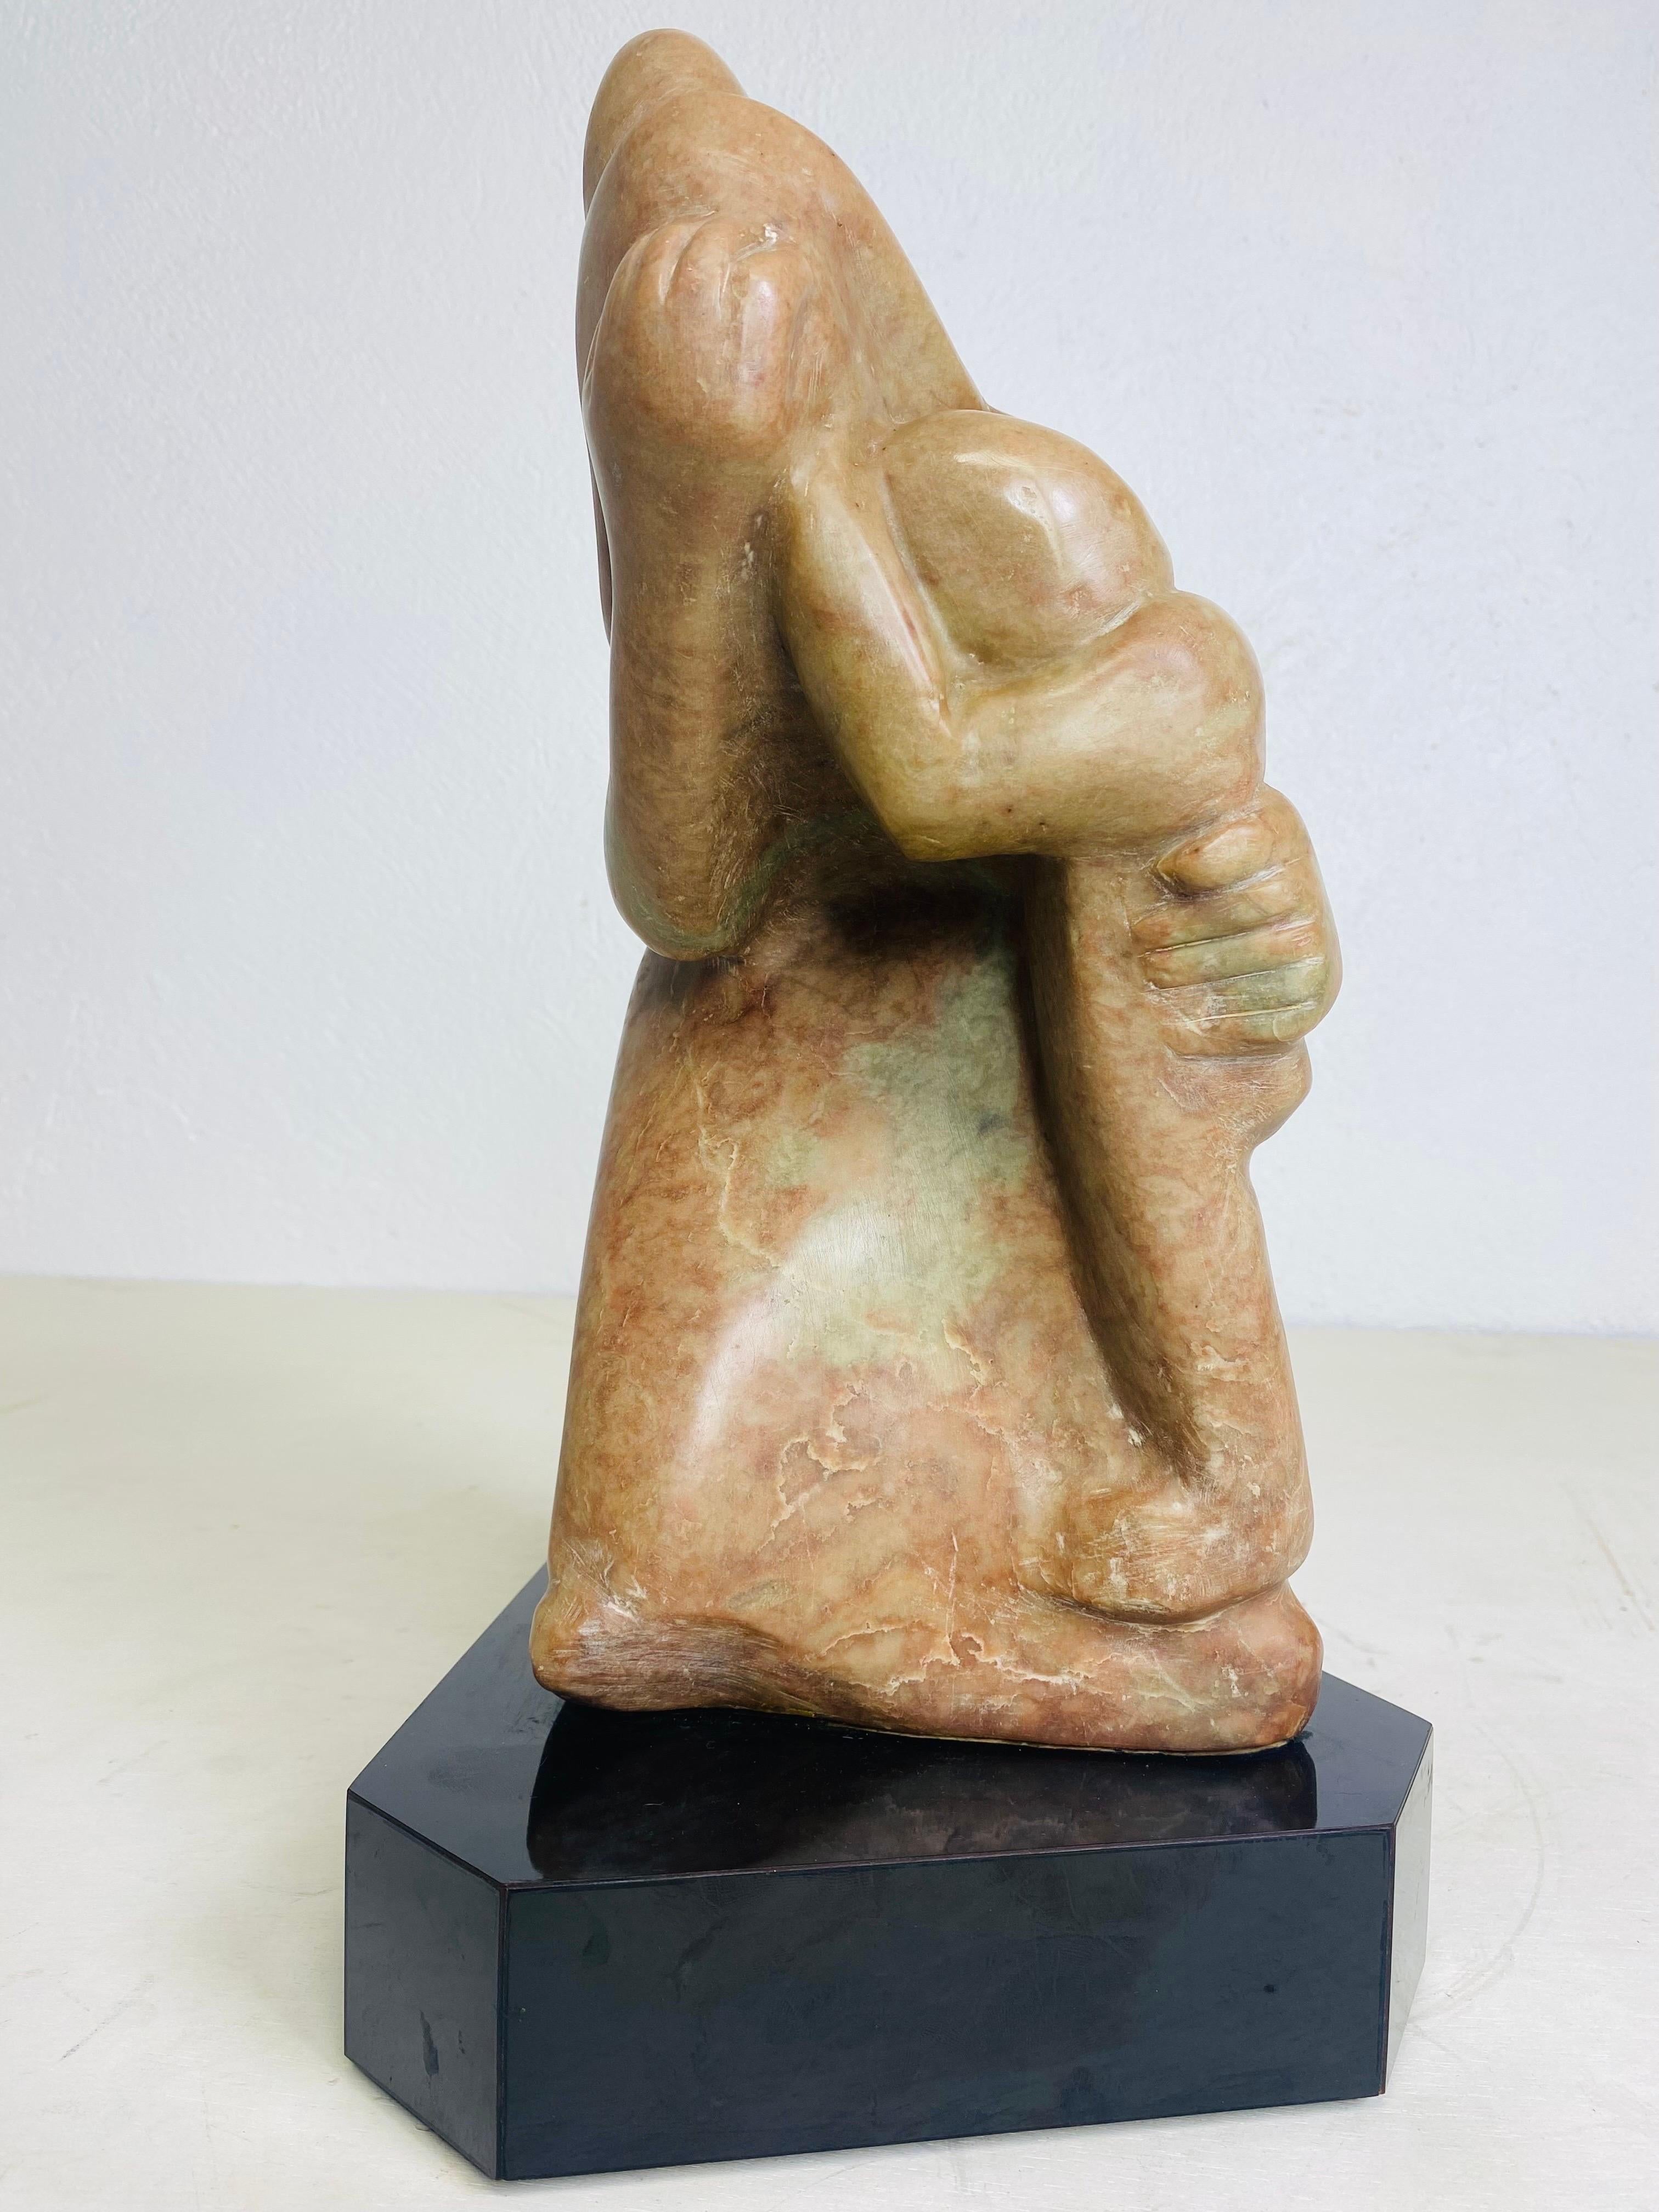 This is a mid century  vintage, modern marble hand carved figural sculpture. The sculpture is a mother and children embracing. This modernist sculpture is presented on a black laminate plinth. The sculpture is artist side on the back lower left-hand